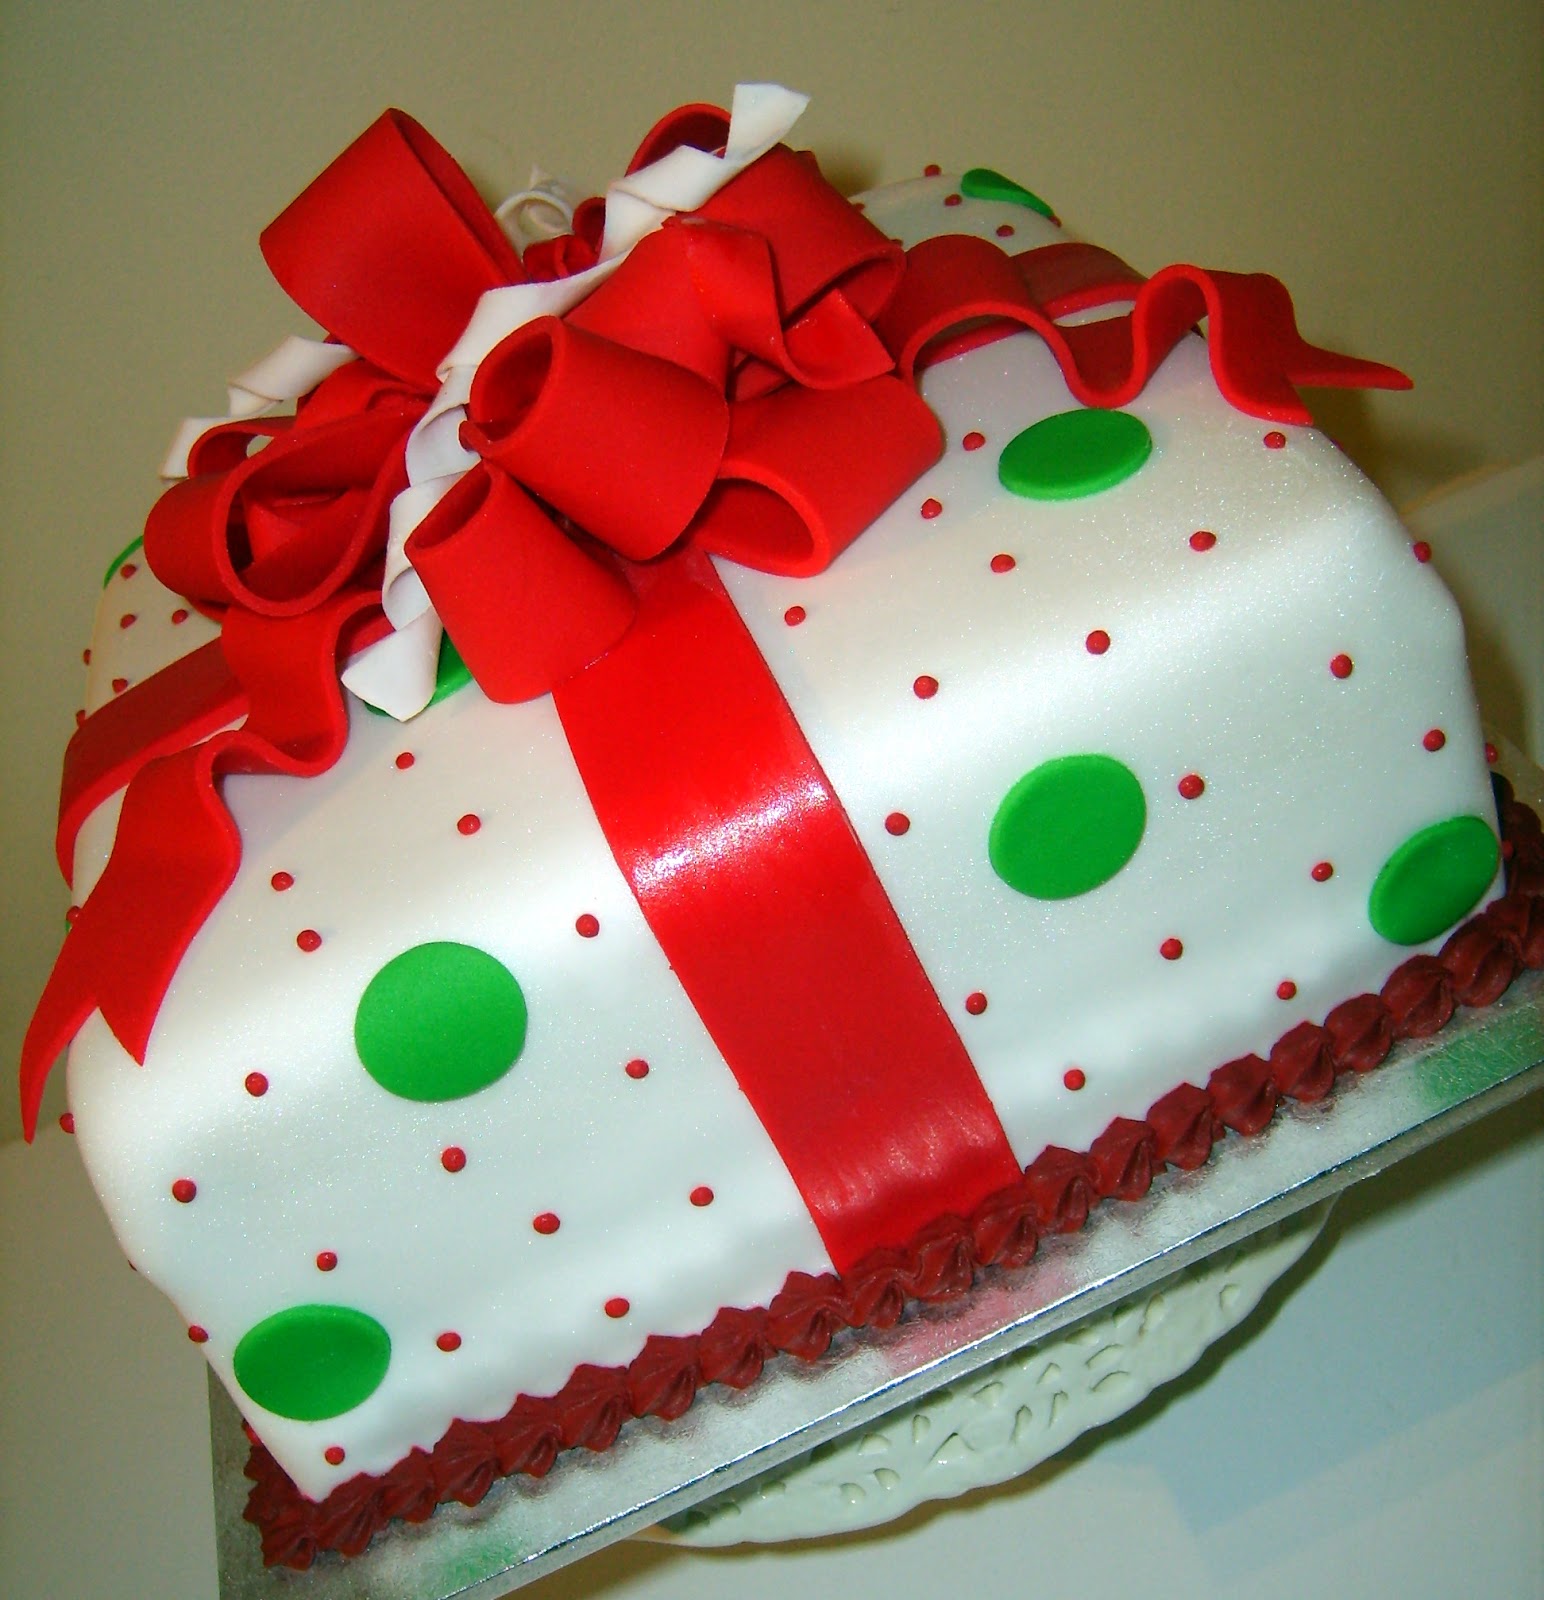 Christmas Gift Box Cake With Lights - CakeCentral.com